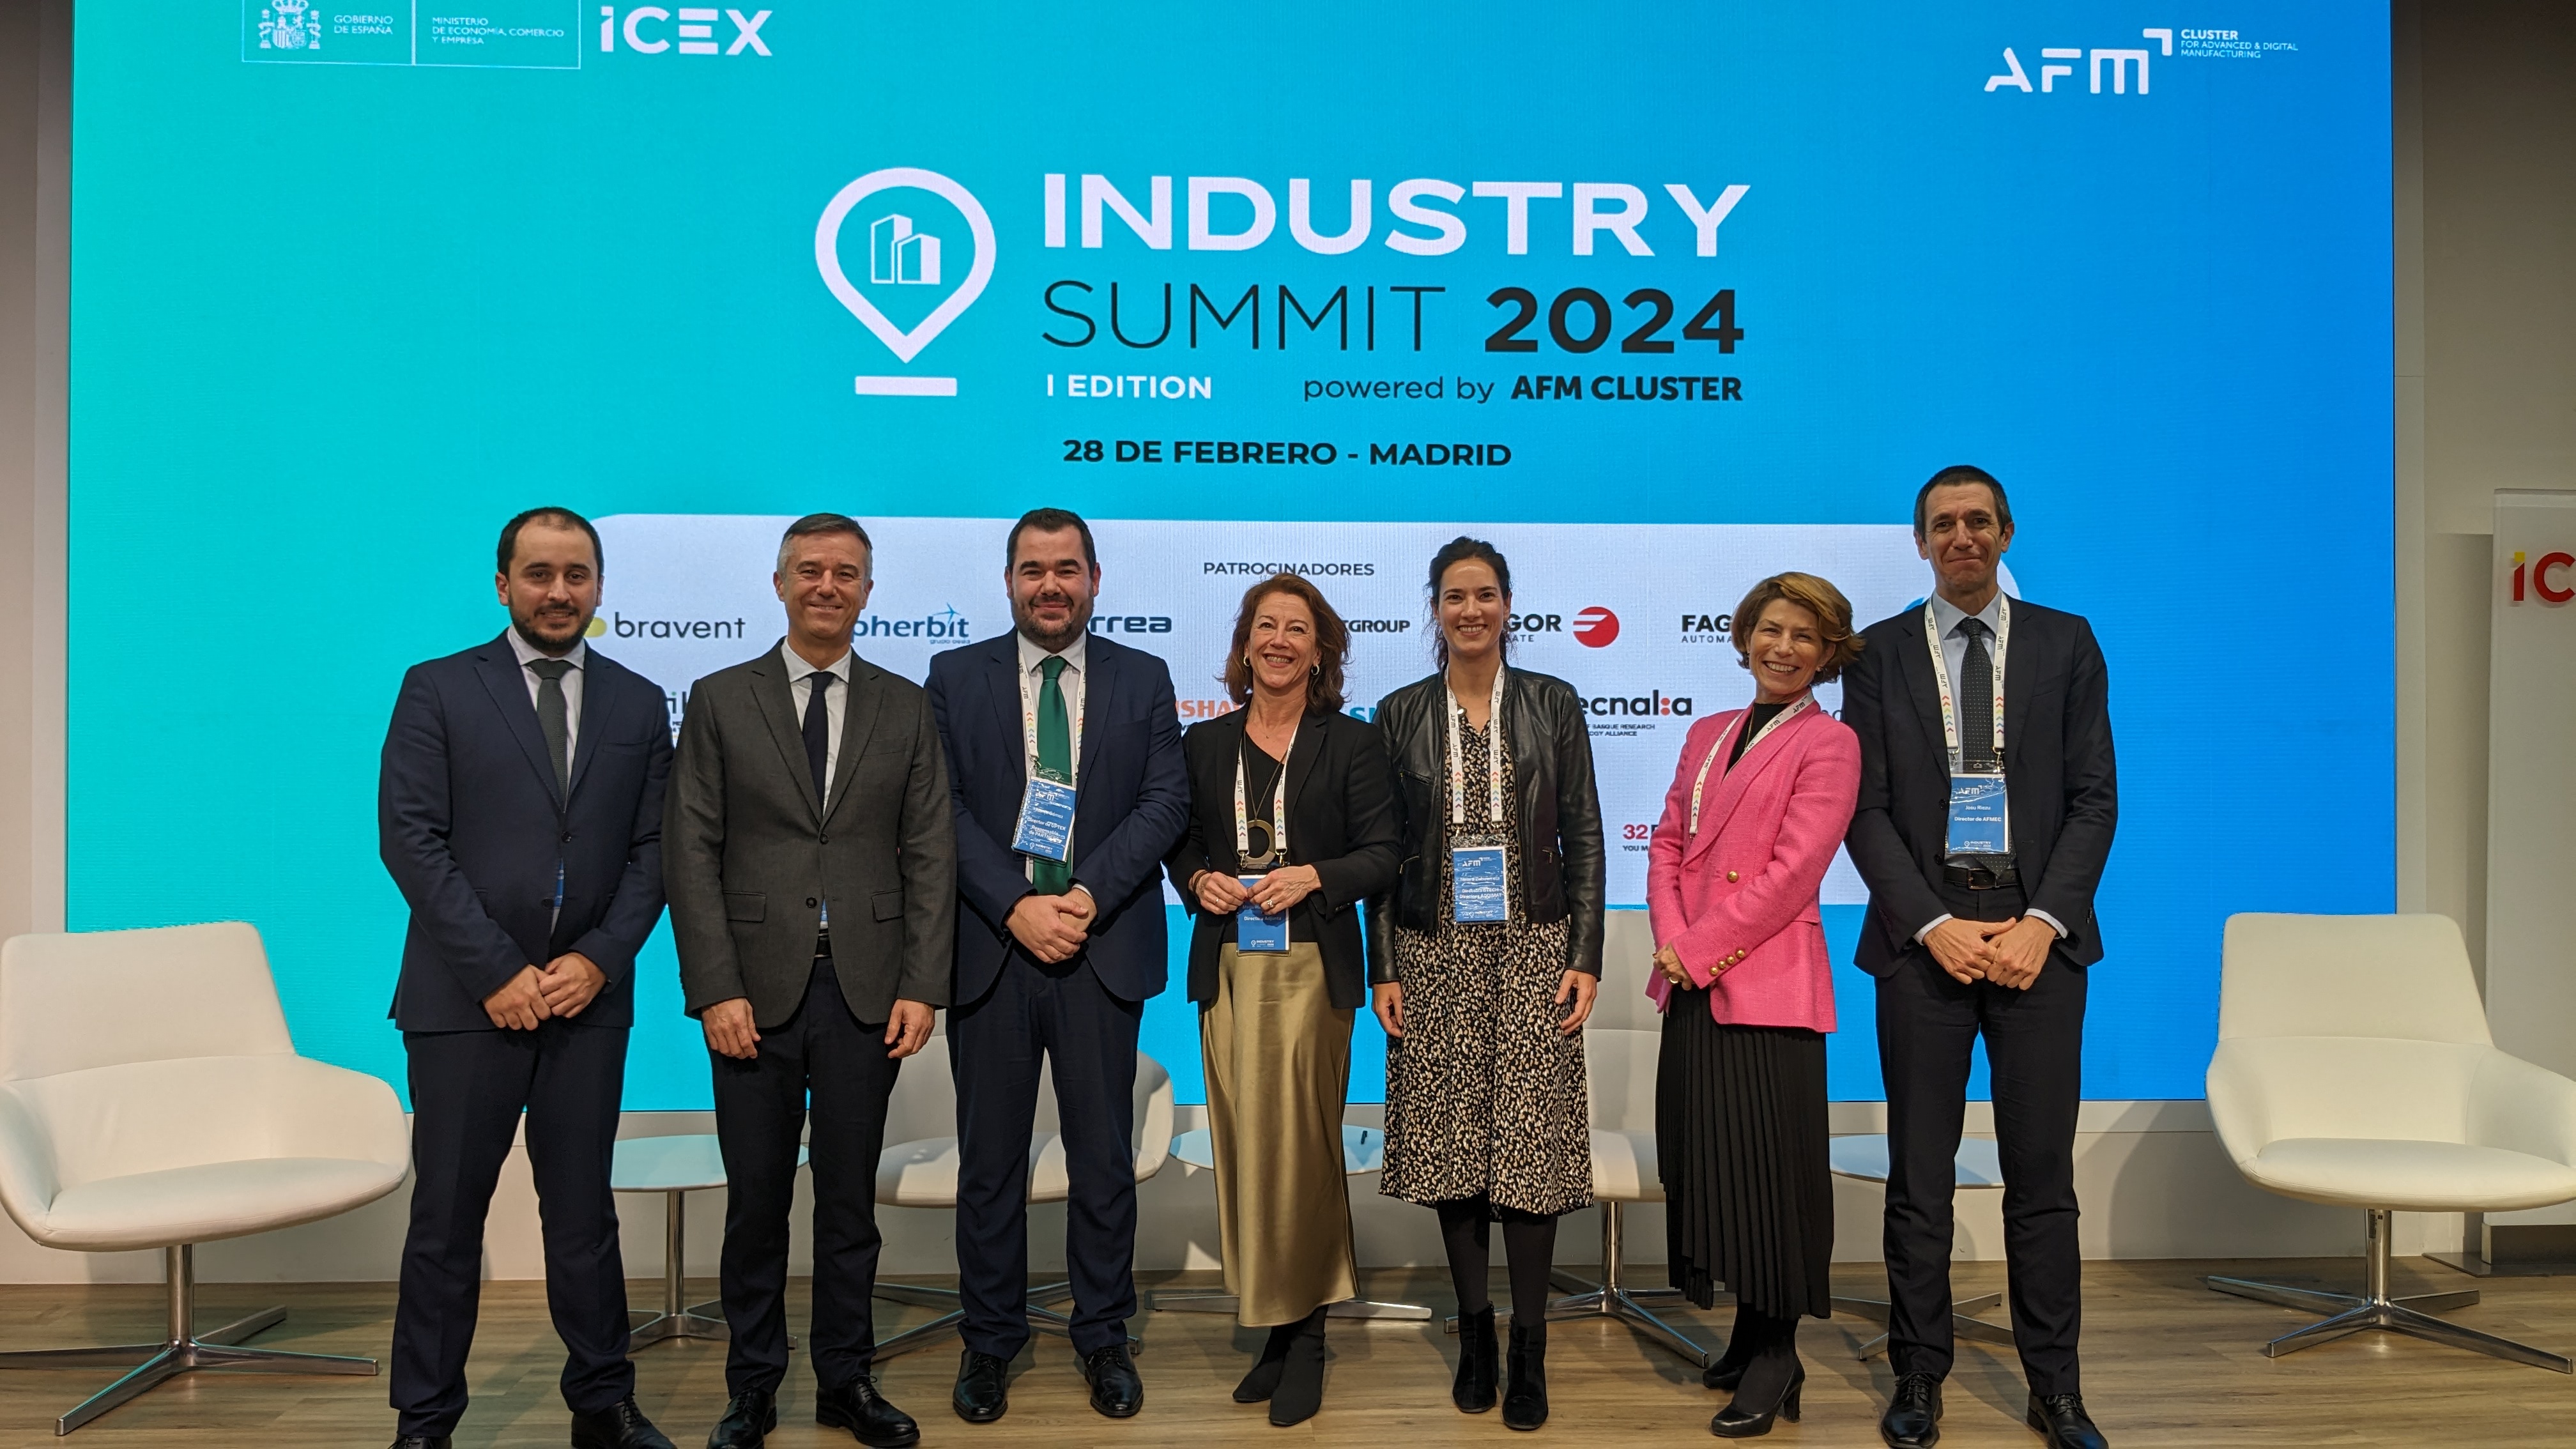 Successful first edition of the Industry Summit: nearly 150 professionals come together to drive innovation in advanced manufacturing